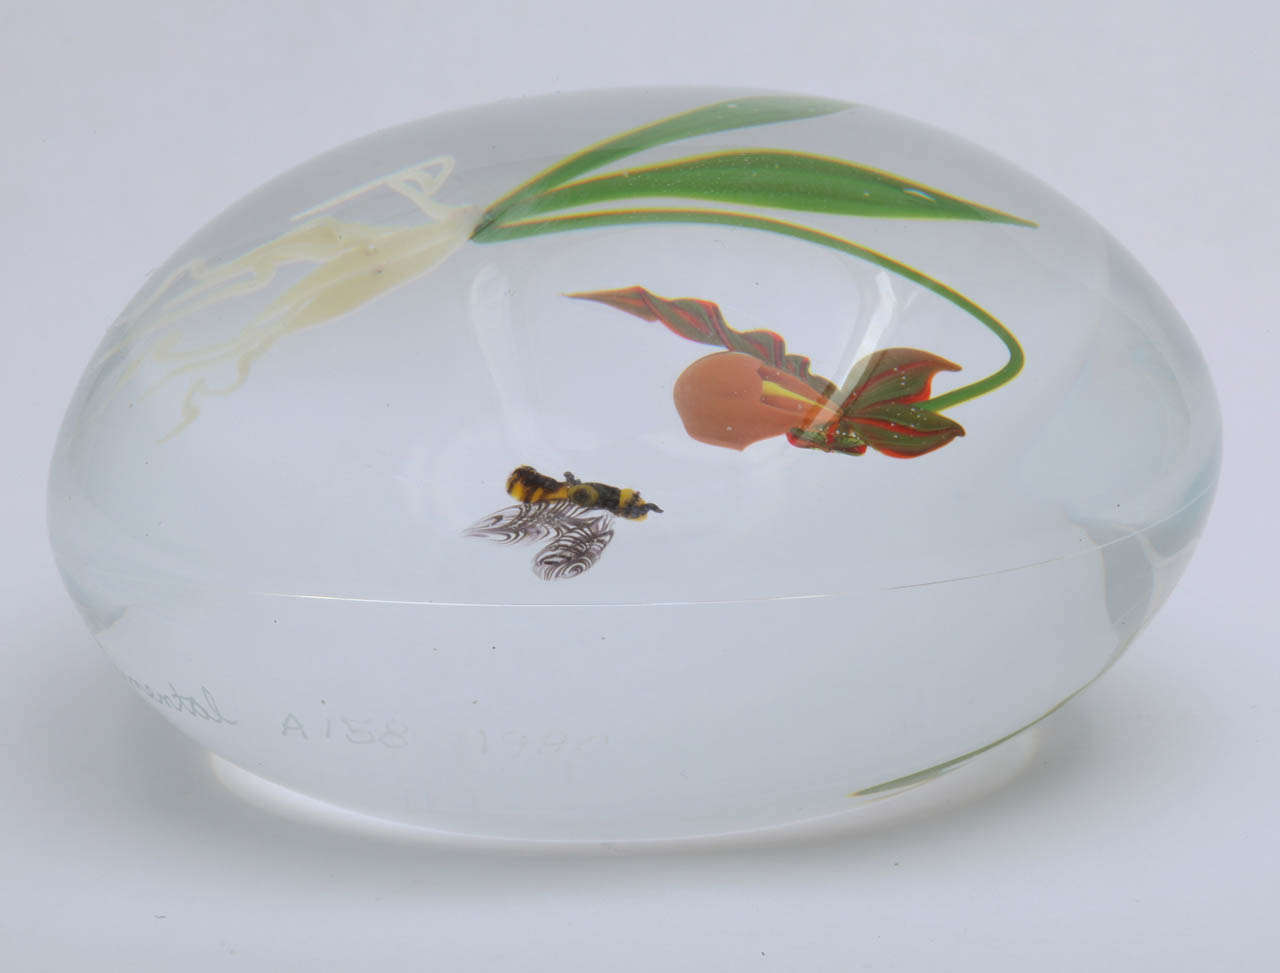 An early Paul; Stankard orchid and bee paperweight with an orange and green orchid and hovering bee, signed S for Stankard, Experimental, 1980